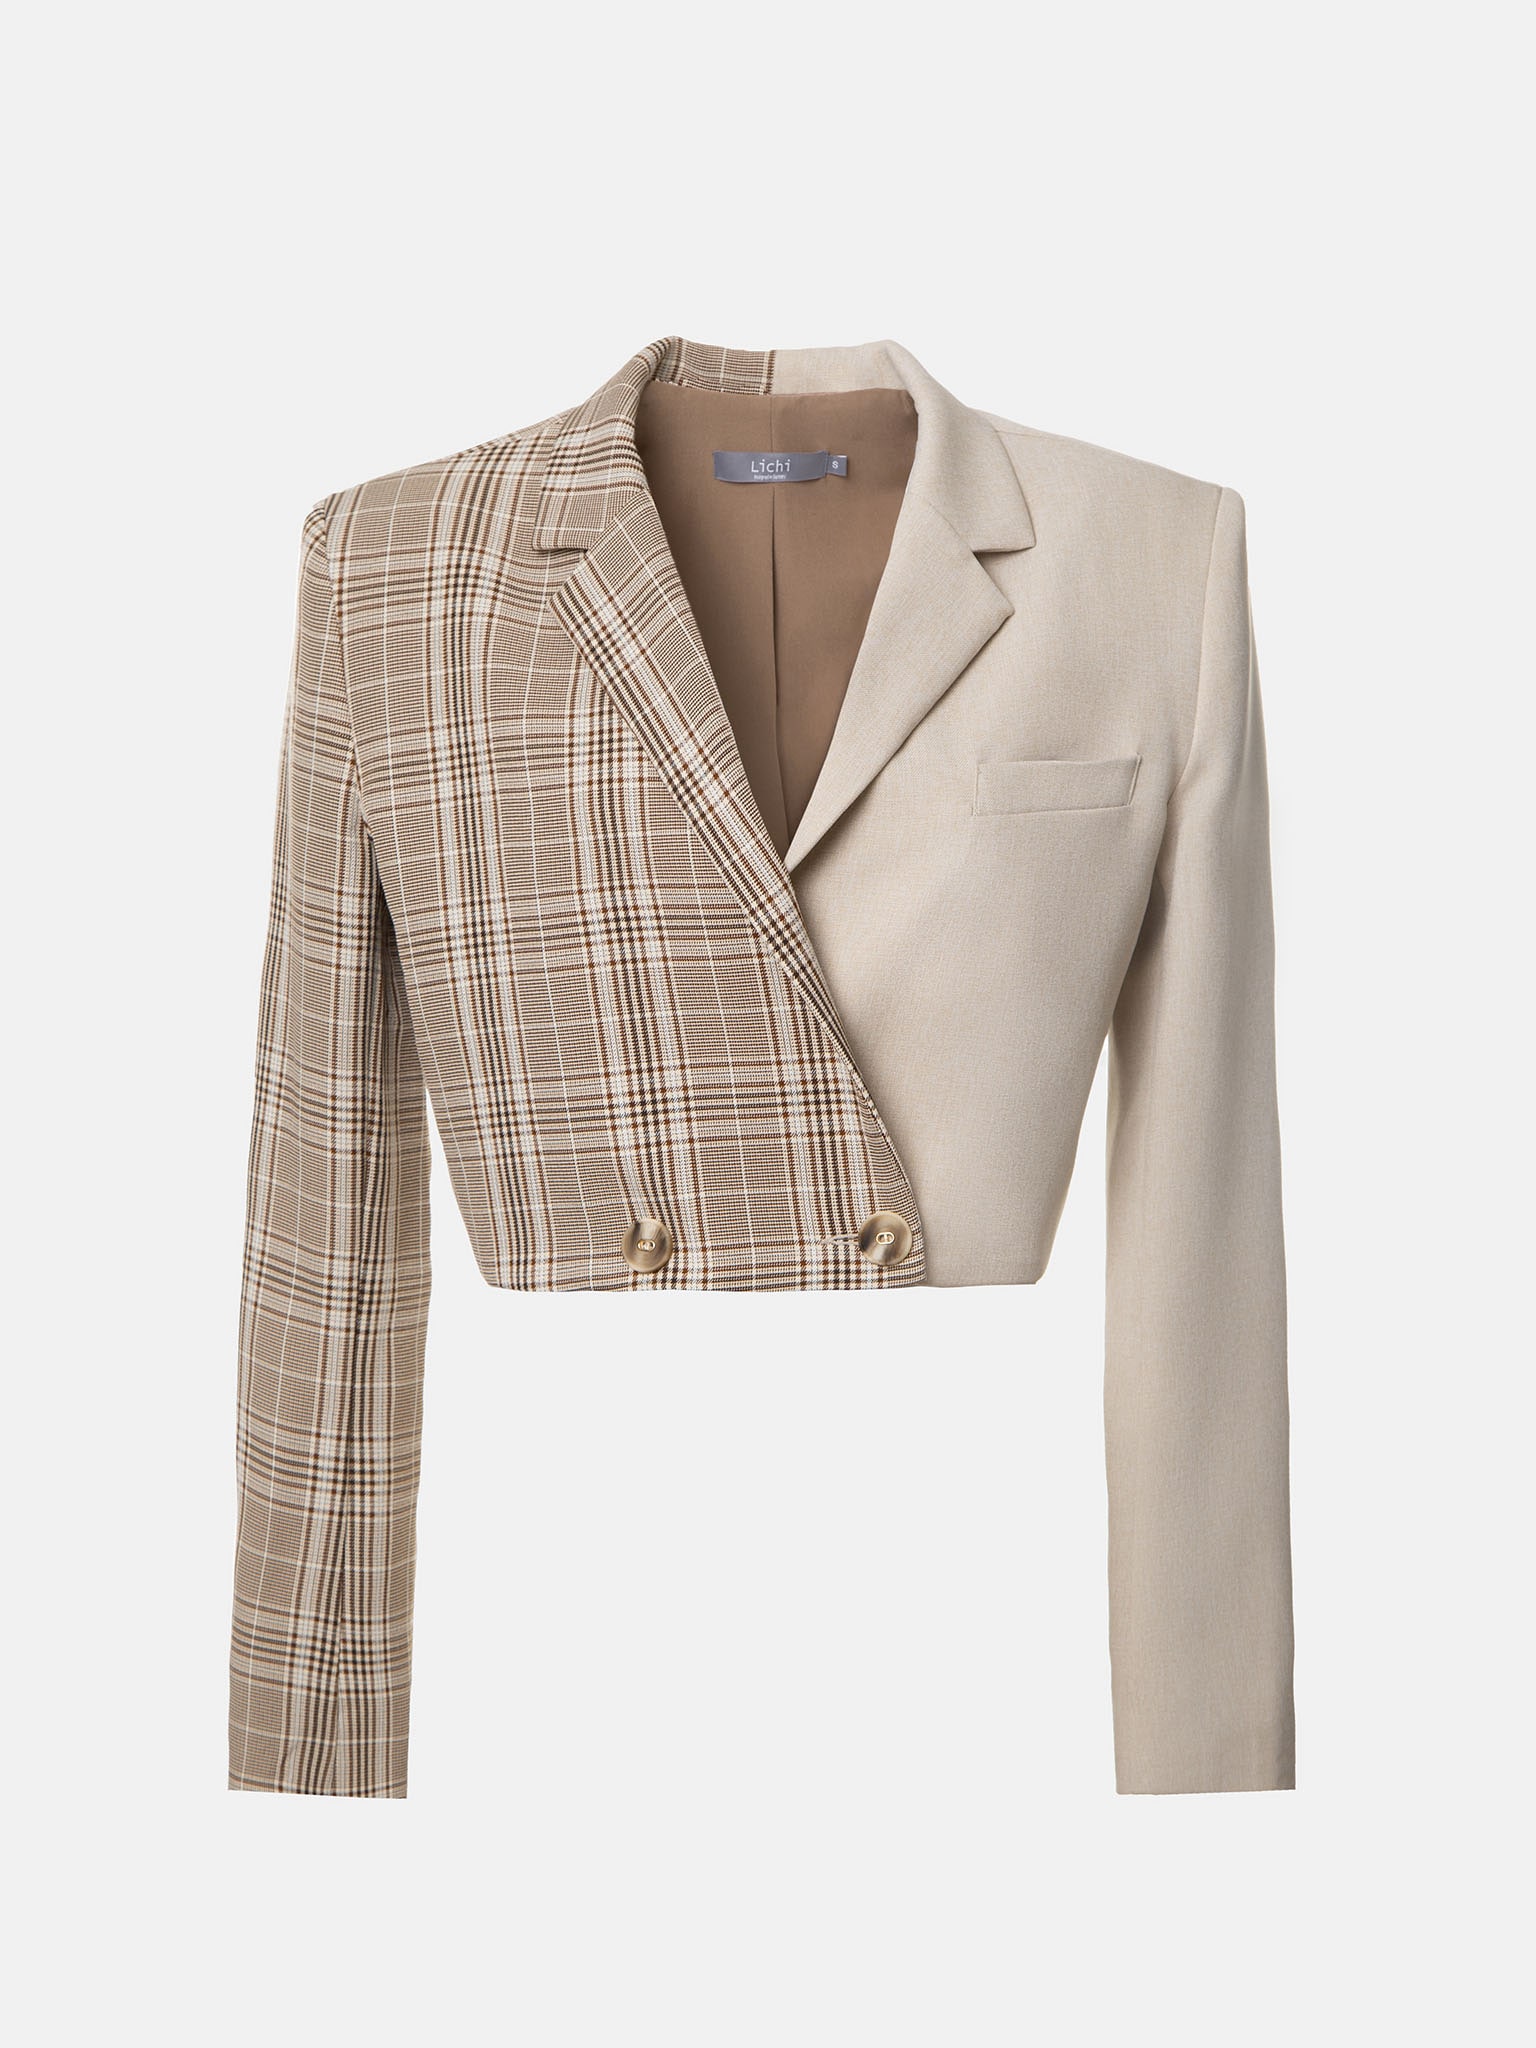 LICHI - Online fashion store :: Two-tone cropped double-breasted blazer